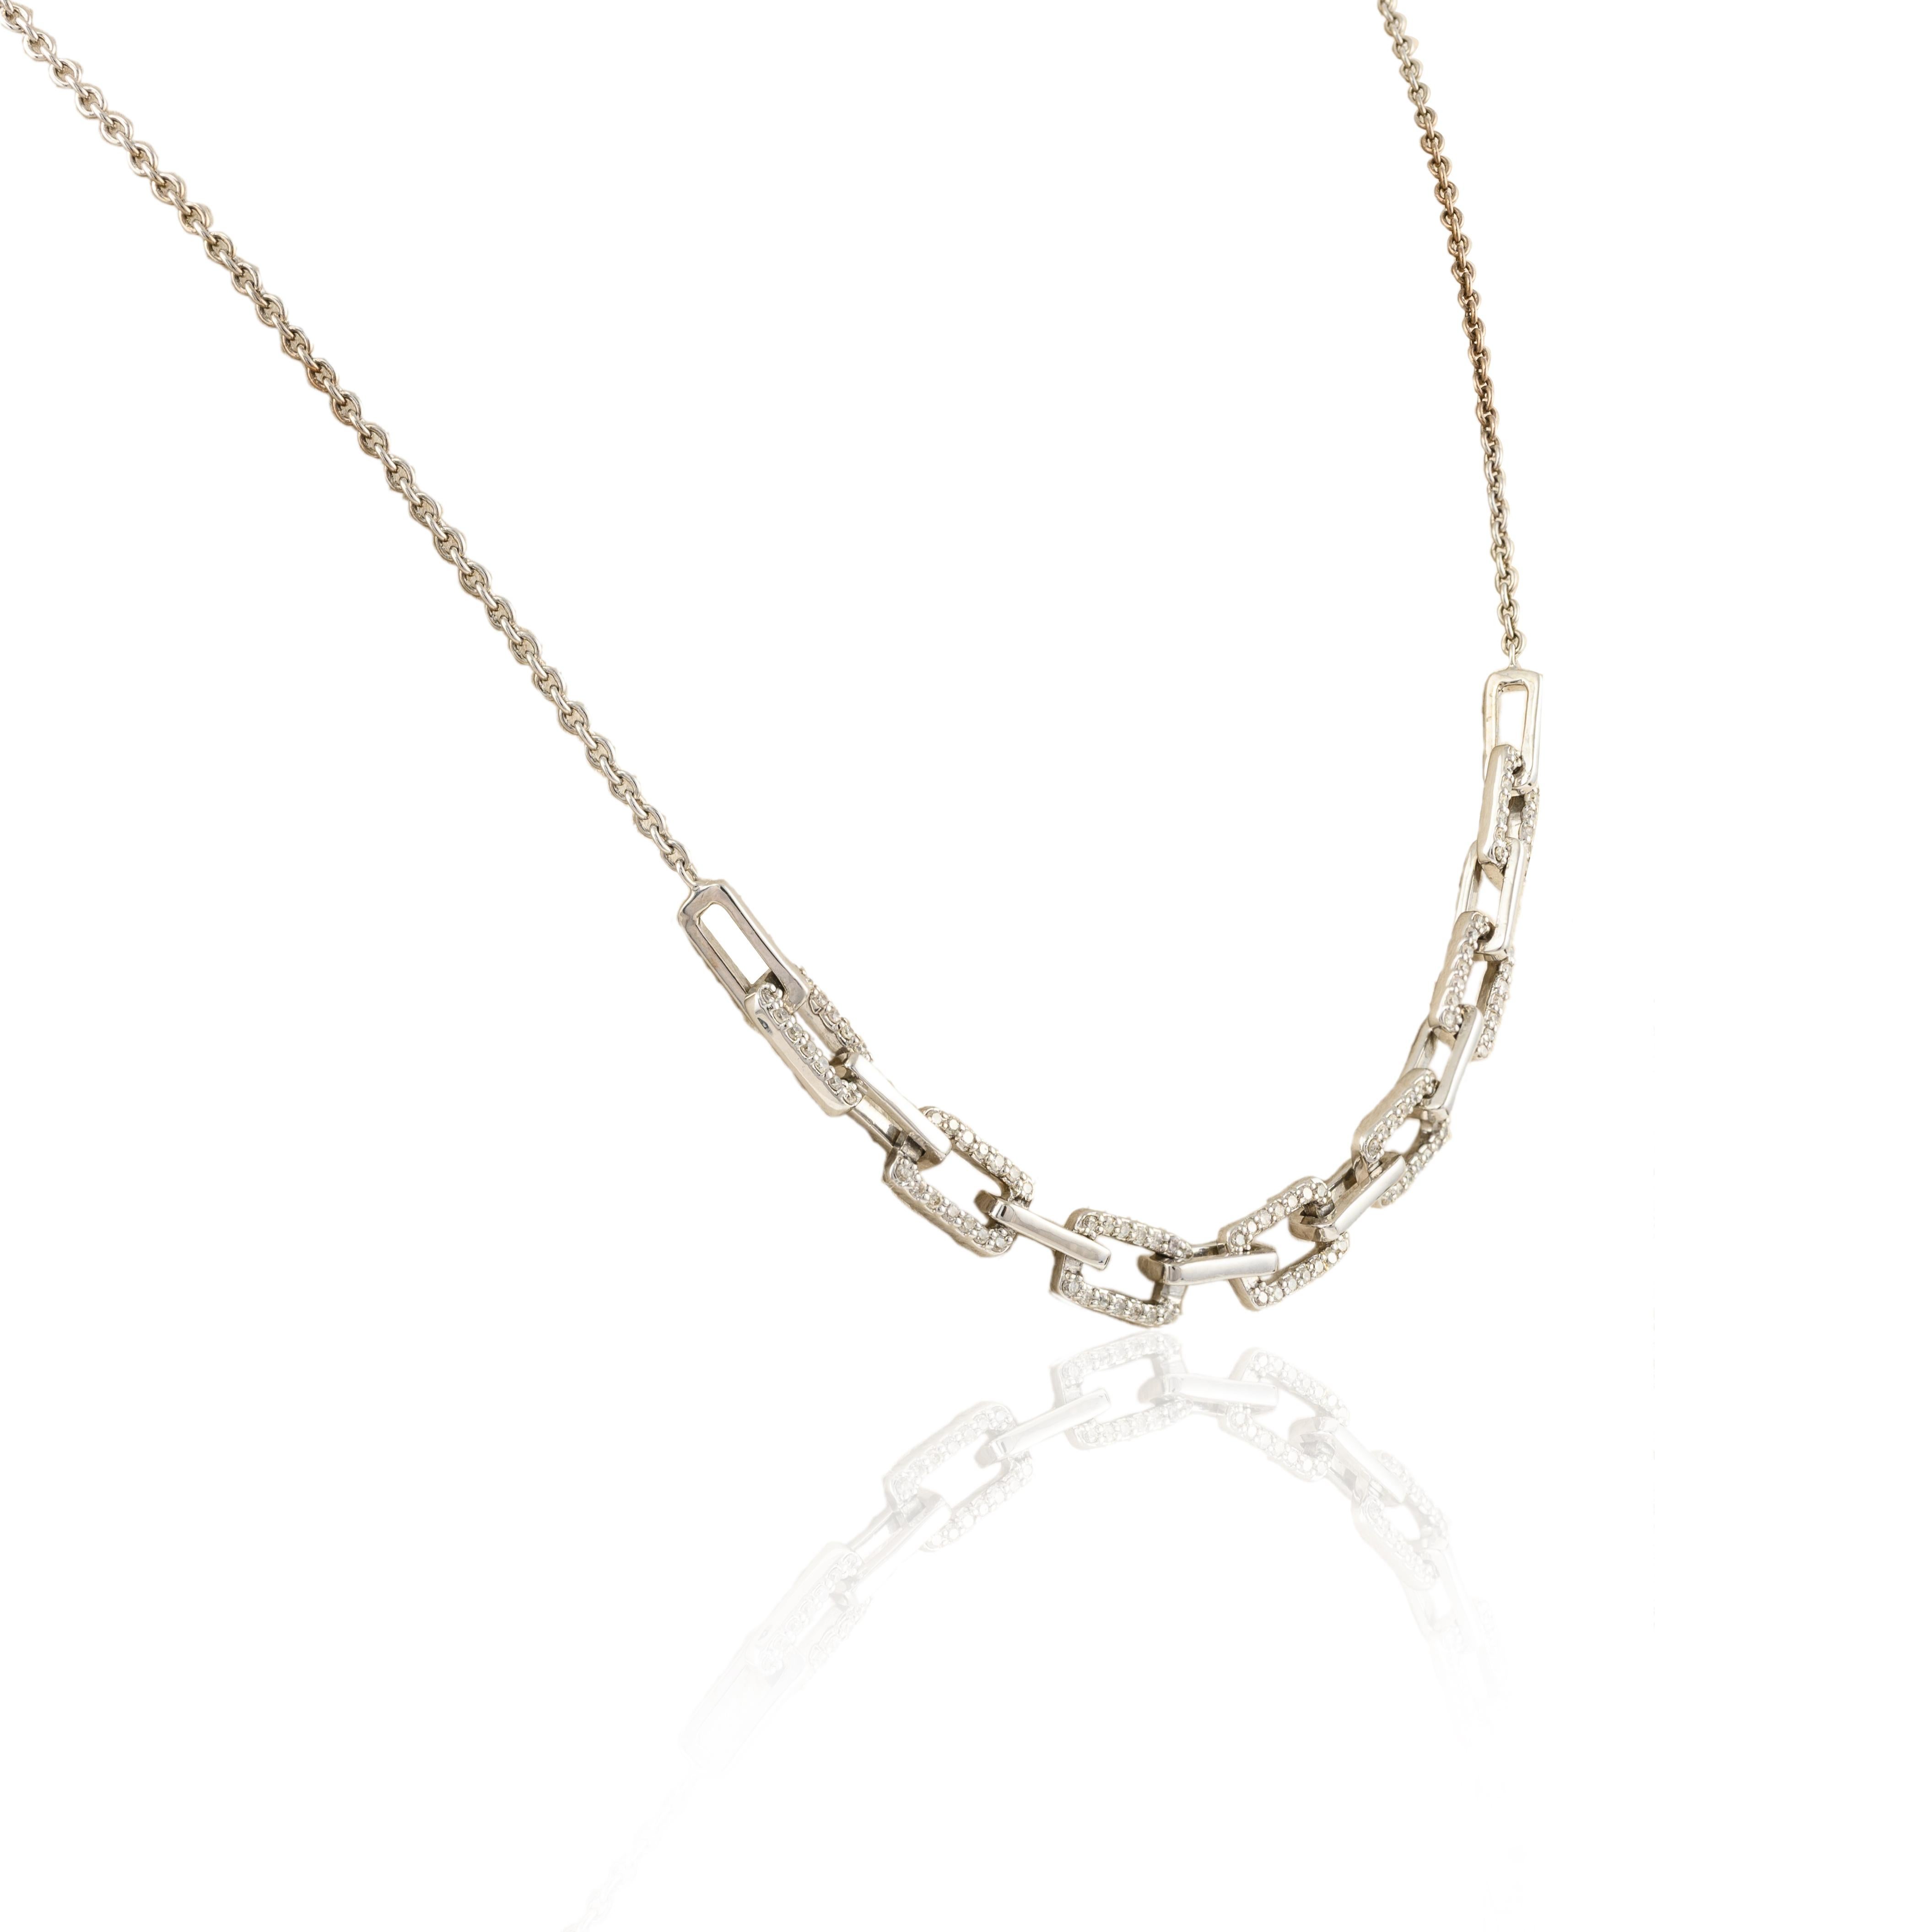 14k Solid White Gold Diamond Paperclip Chain Necklace  studded with round cut diamond. This stunning piece of jewelry instantly elevates a casual look or dressy outfit. 
April birthstone diamond brings love, fame, success and prosperity.
Designed